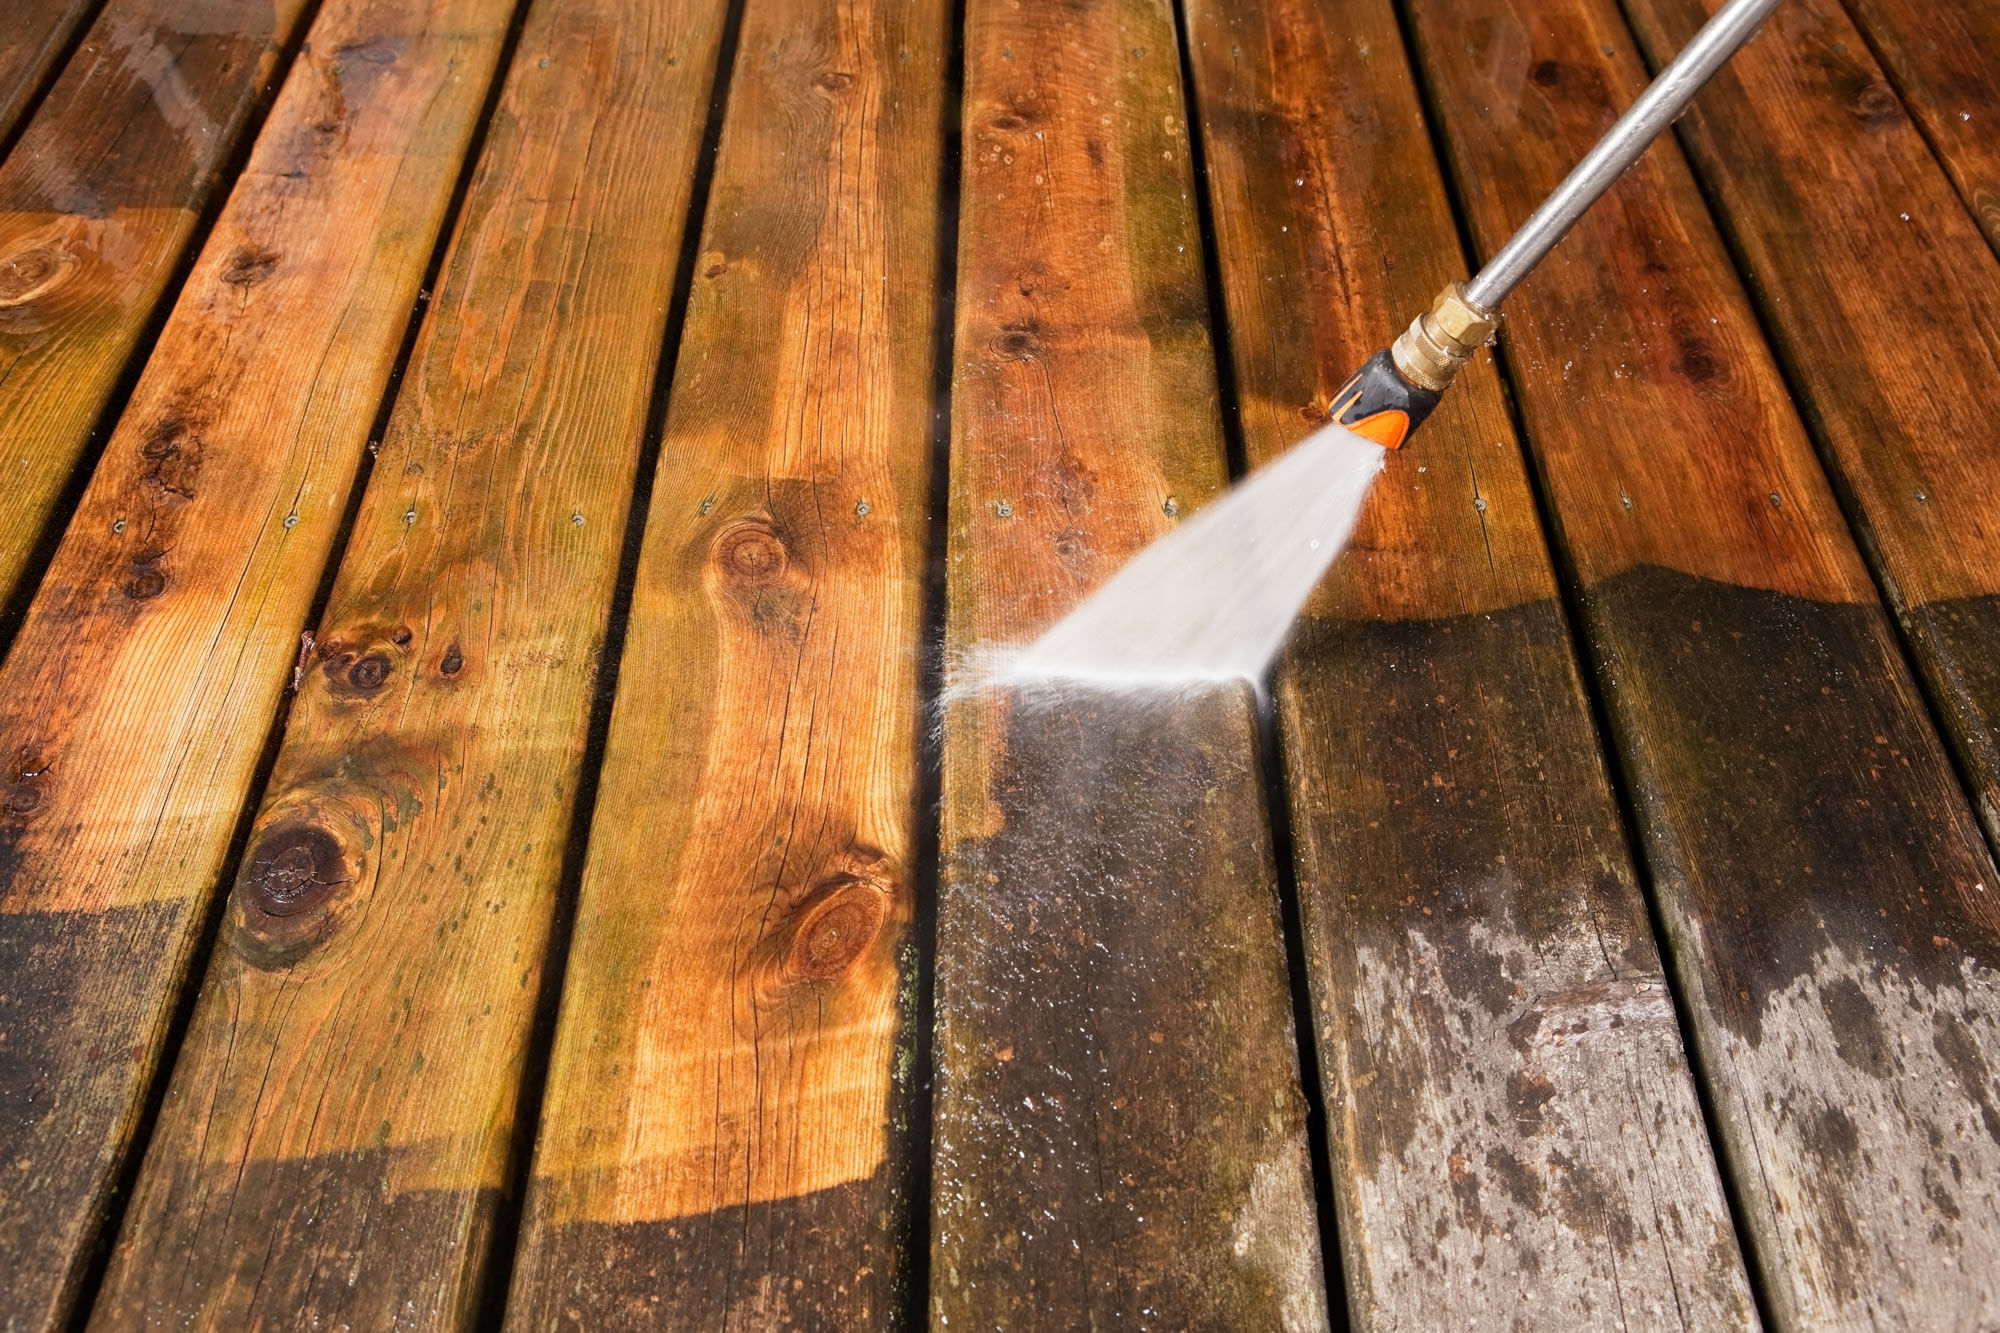 High pressure cleaning for your home